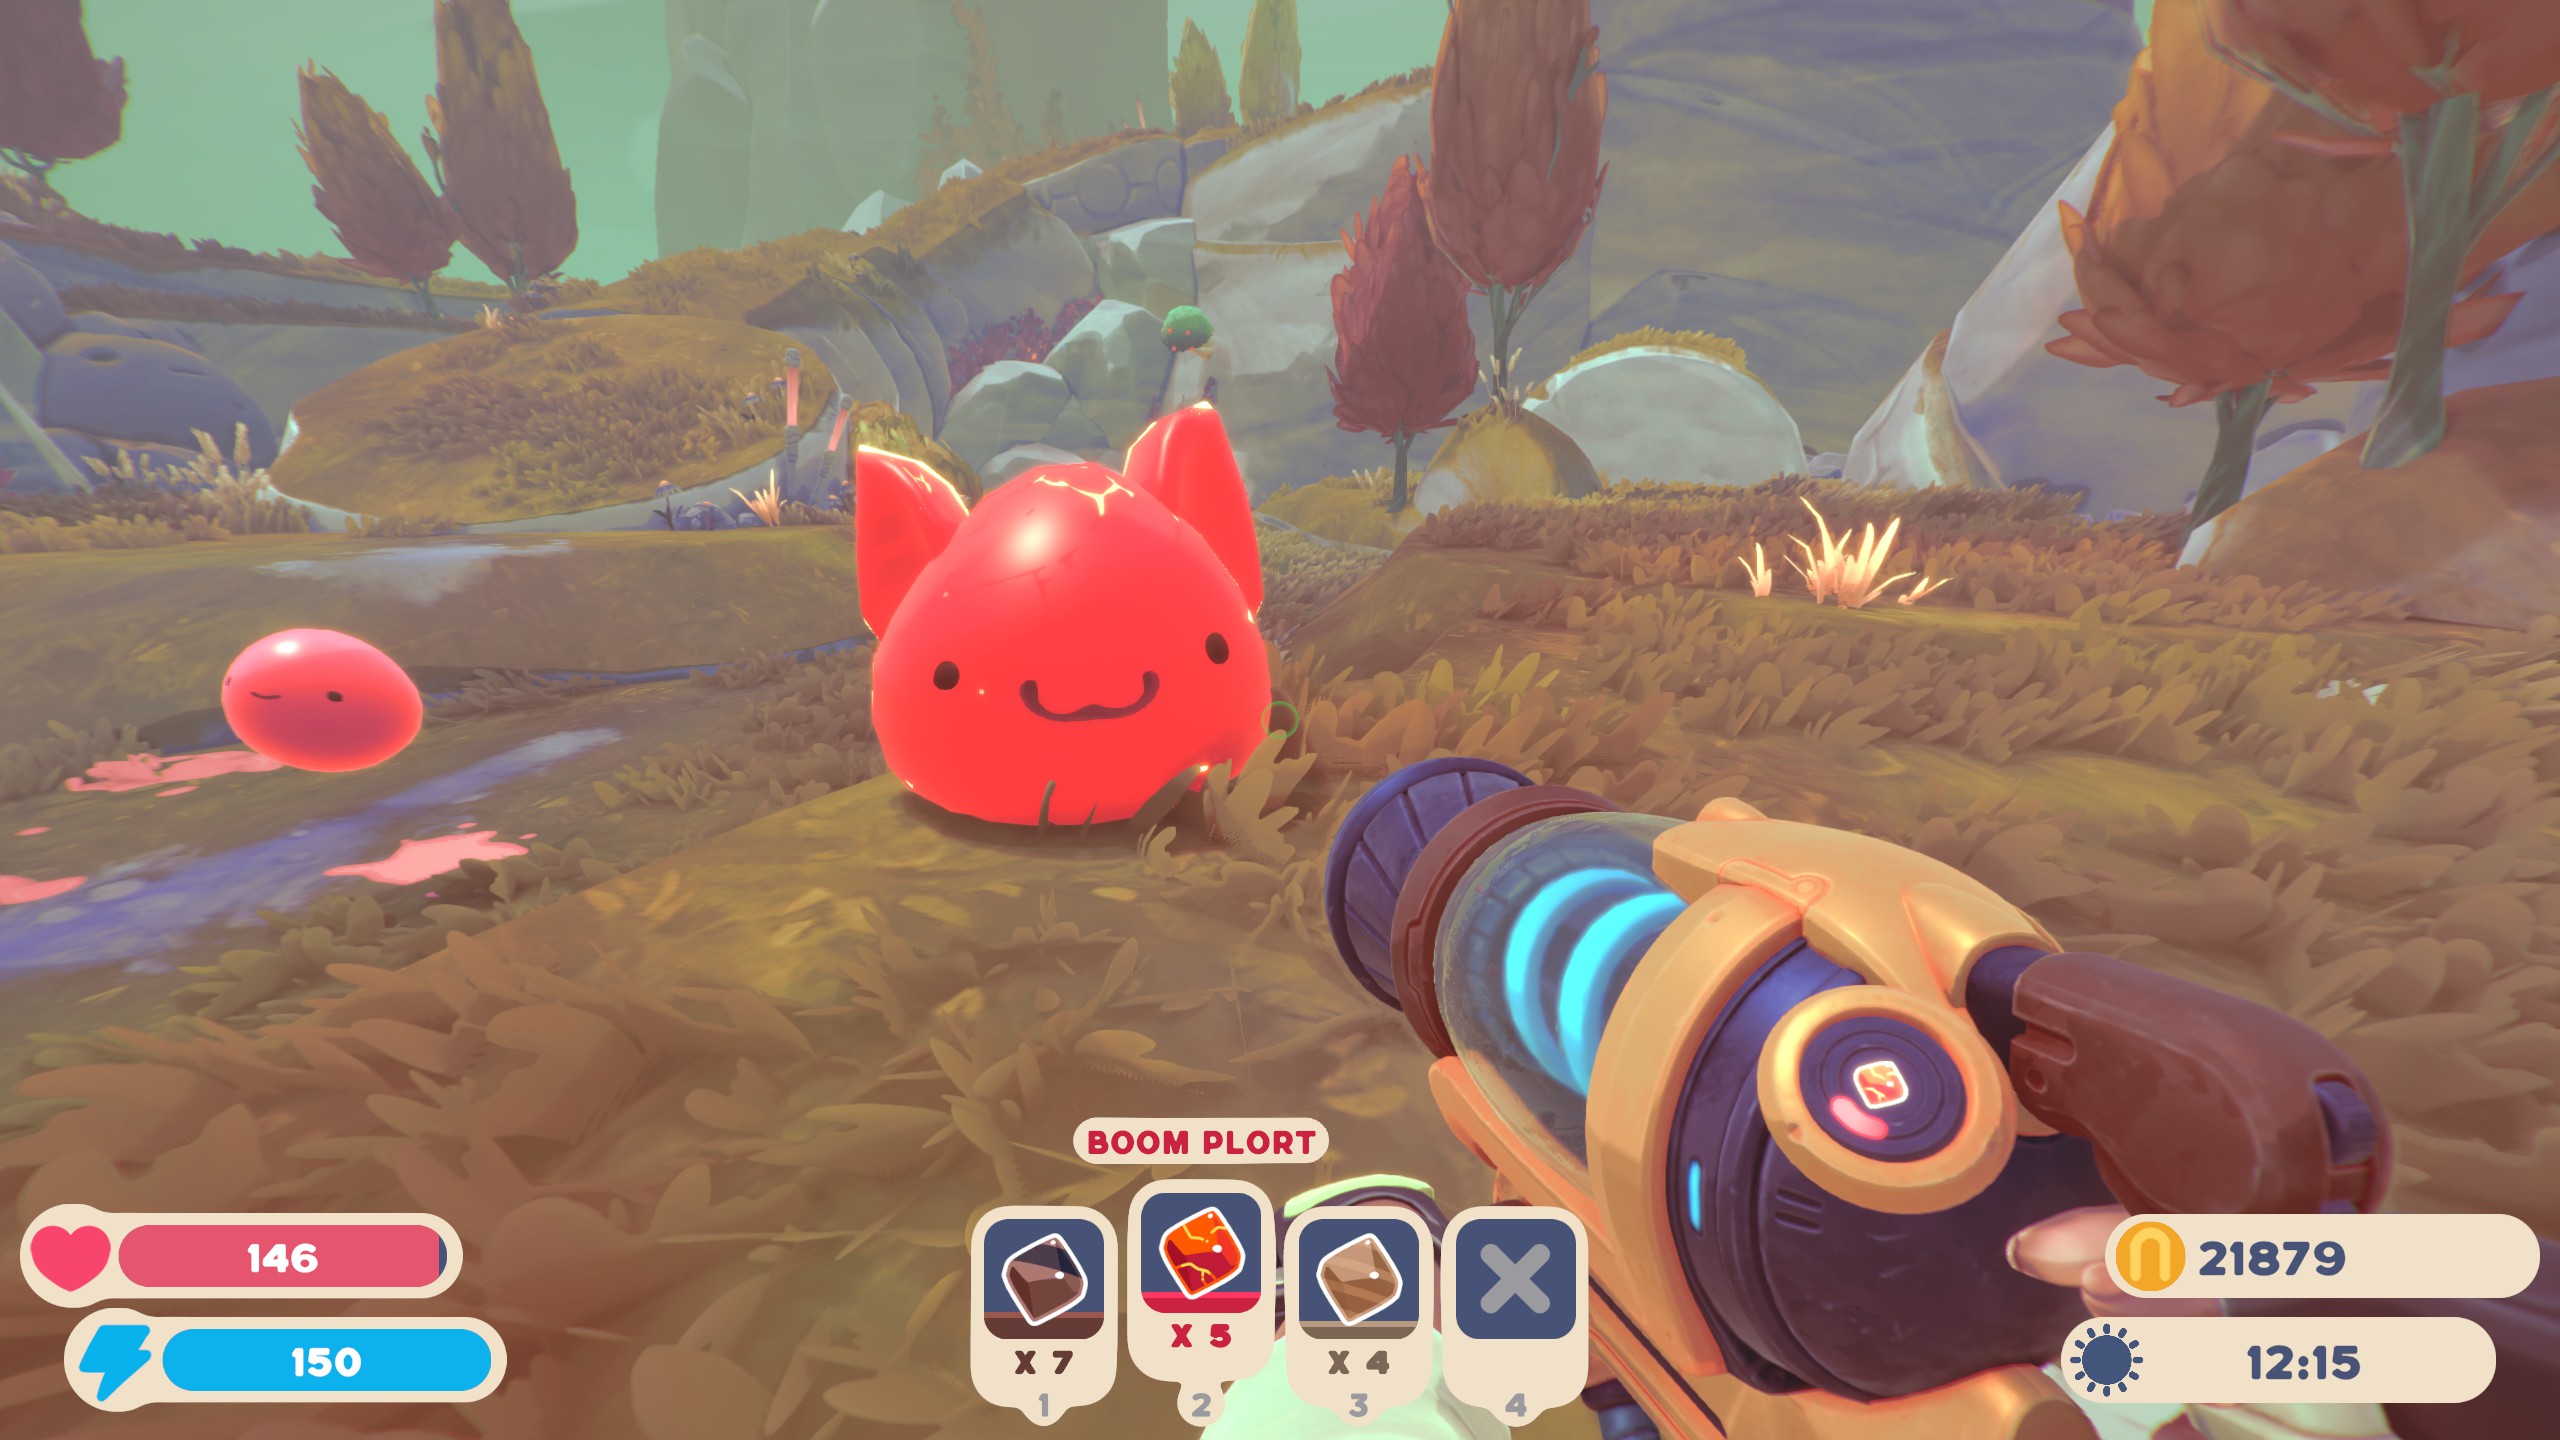 Slime Rancher 2 All Largo Slime Combinations - Tabby - D4D45C6